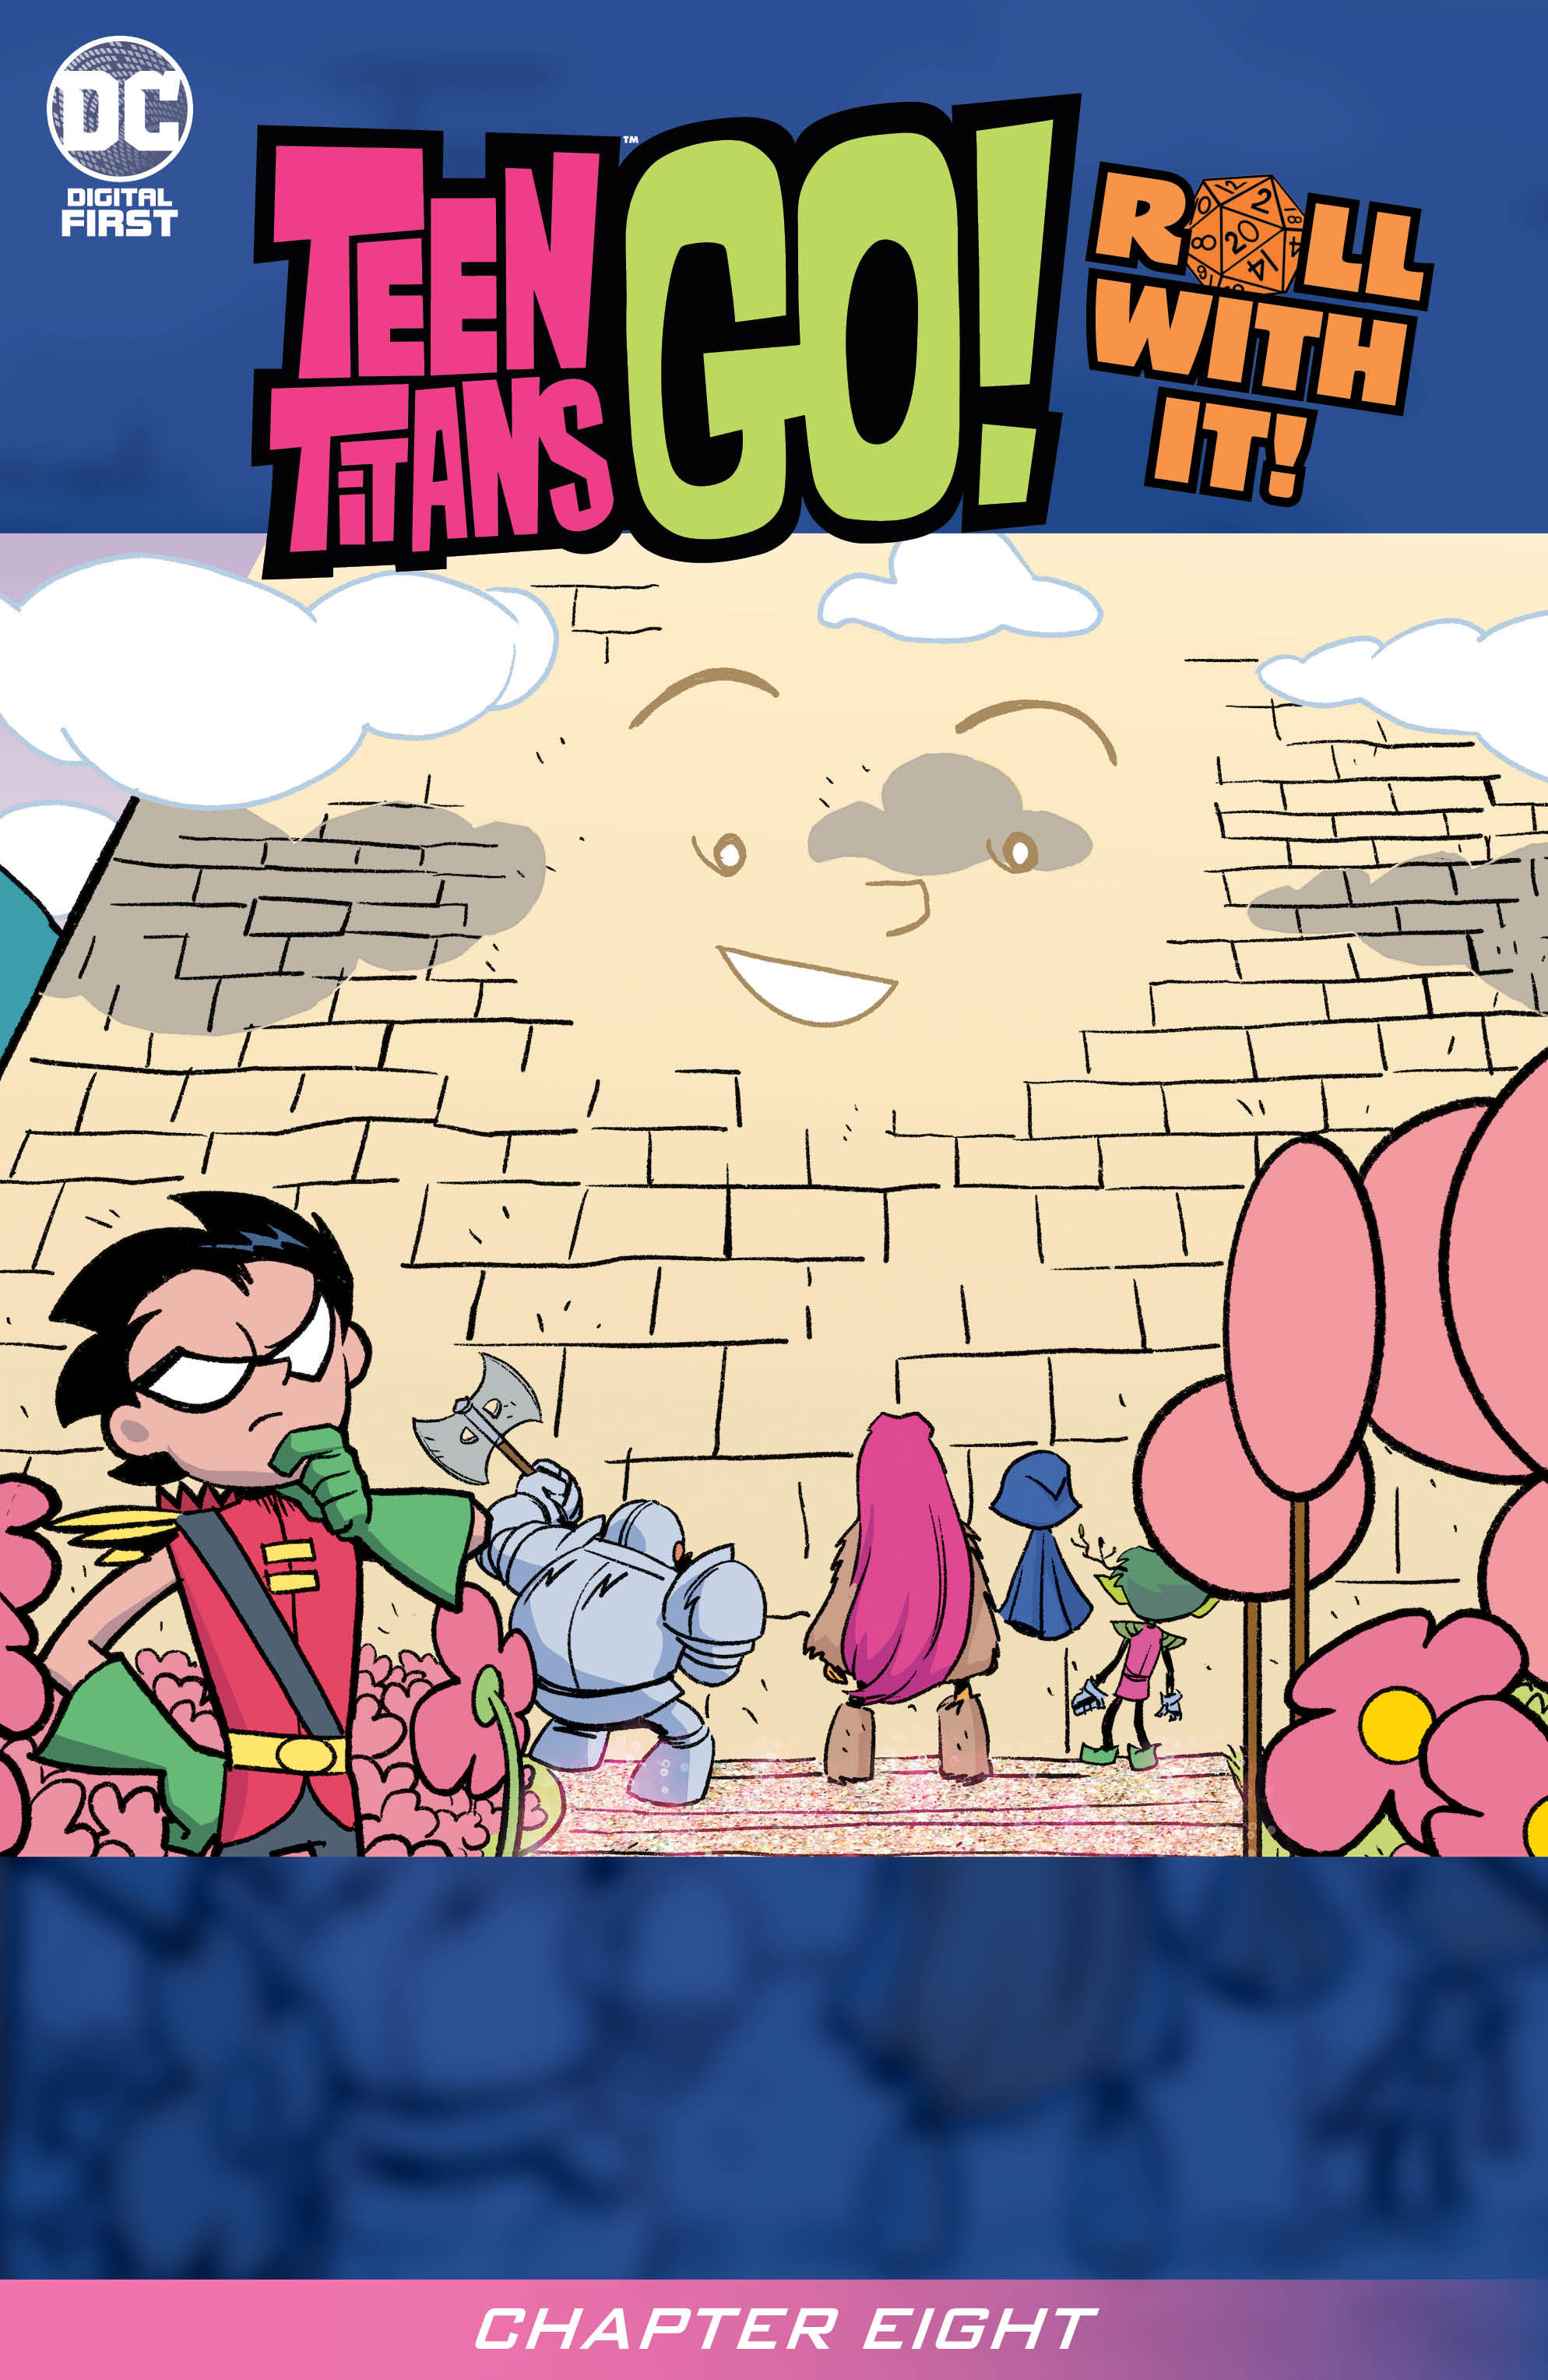 Teen Titans Go! Roll With It! (2020): Chapter 8 - Page 2